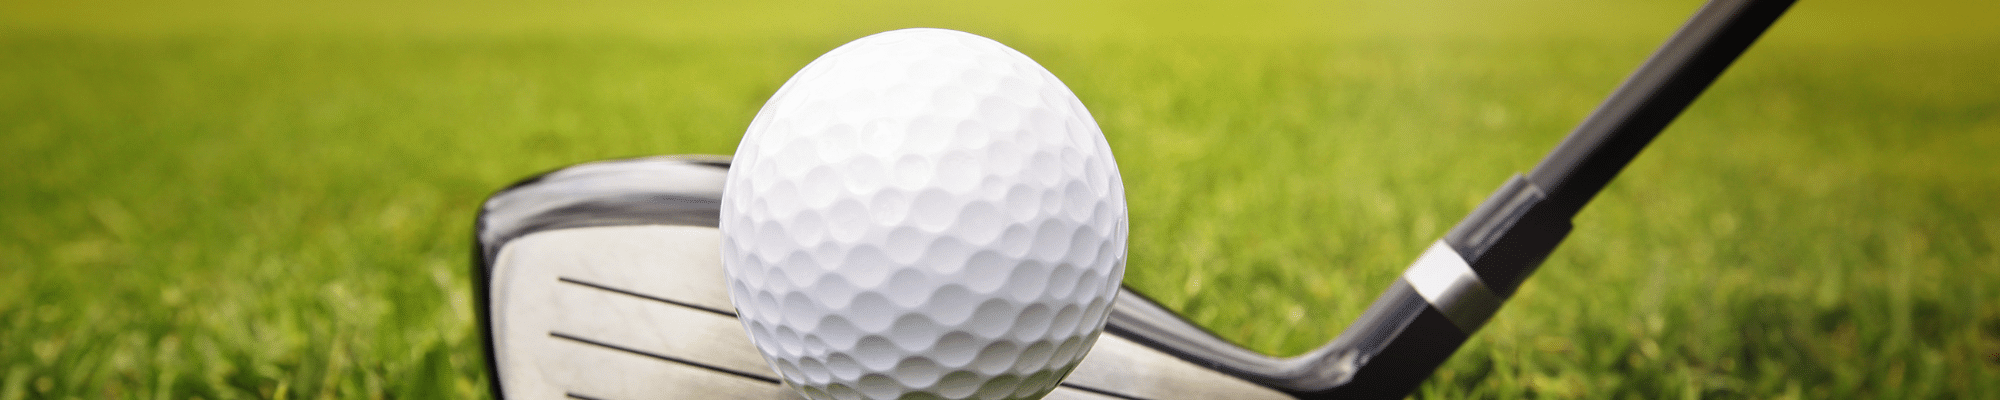 Photo of golf ball and golf iron on golf course